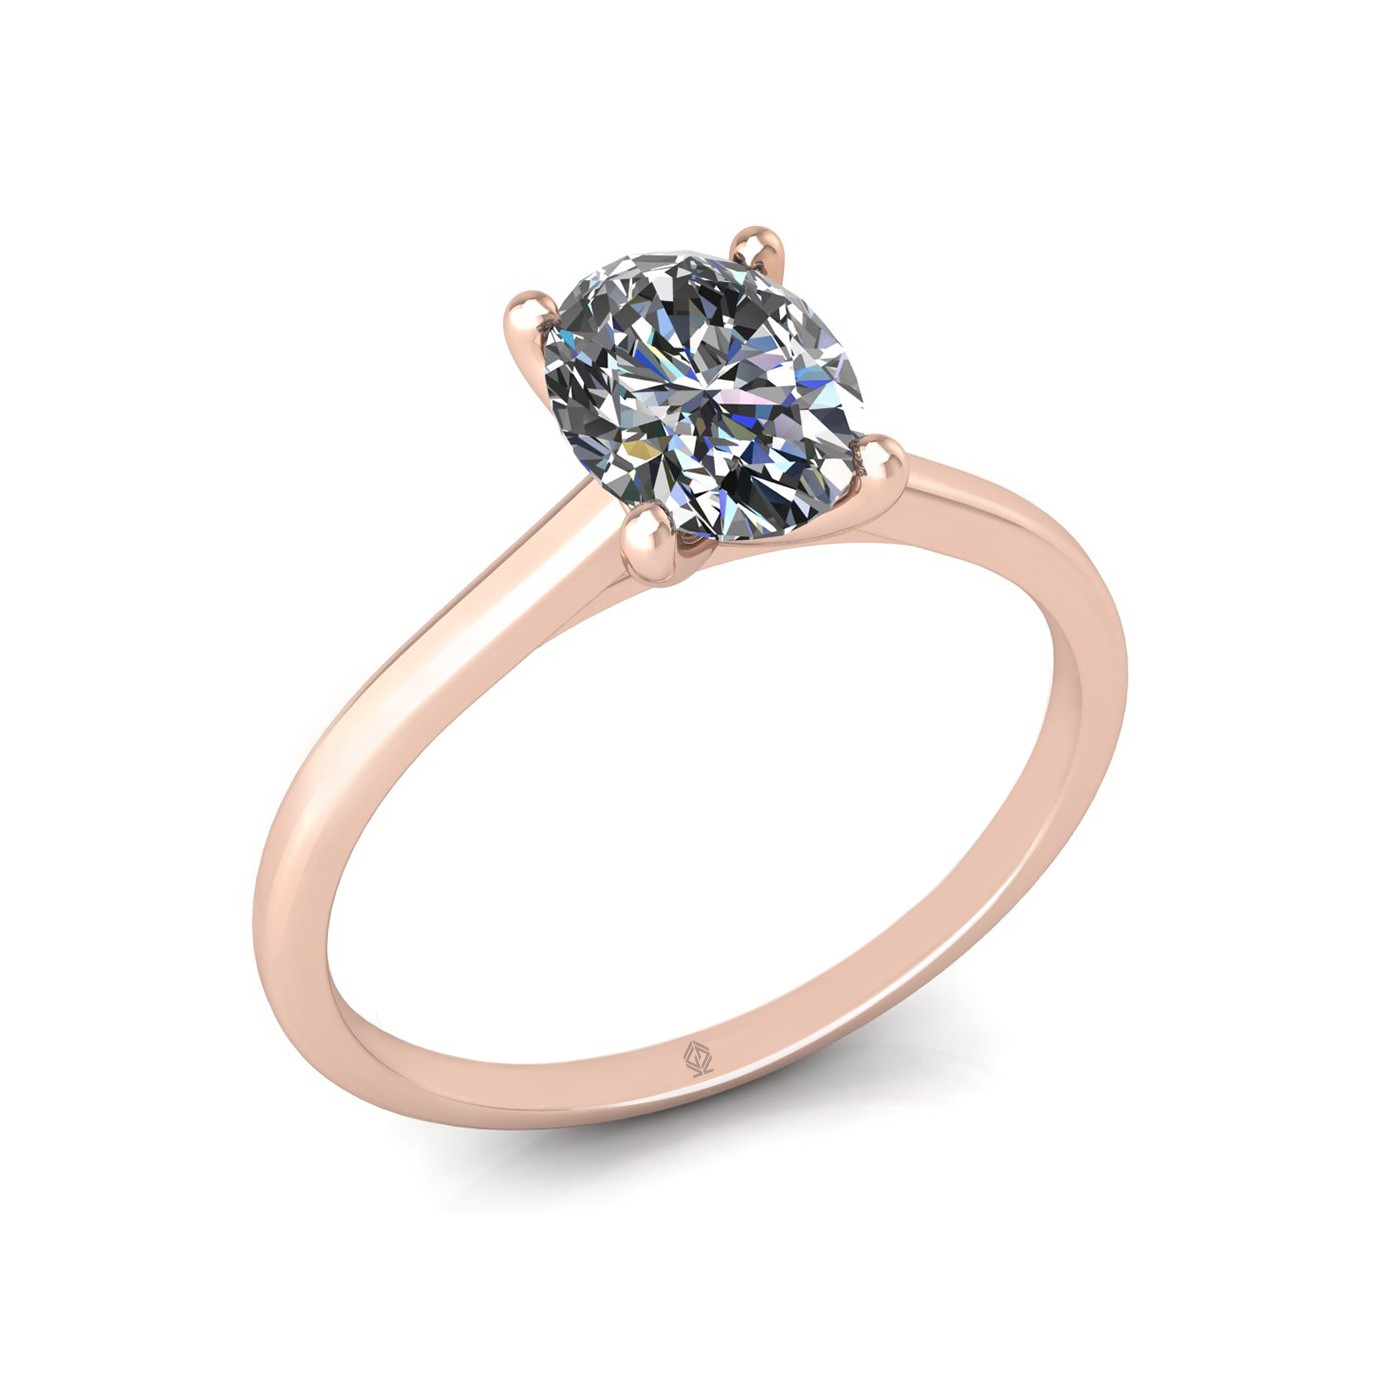 18k rose gold  1,00 ct 4 prongs solitaire oval cut diamond engagement ring with whisper thin band